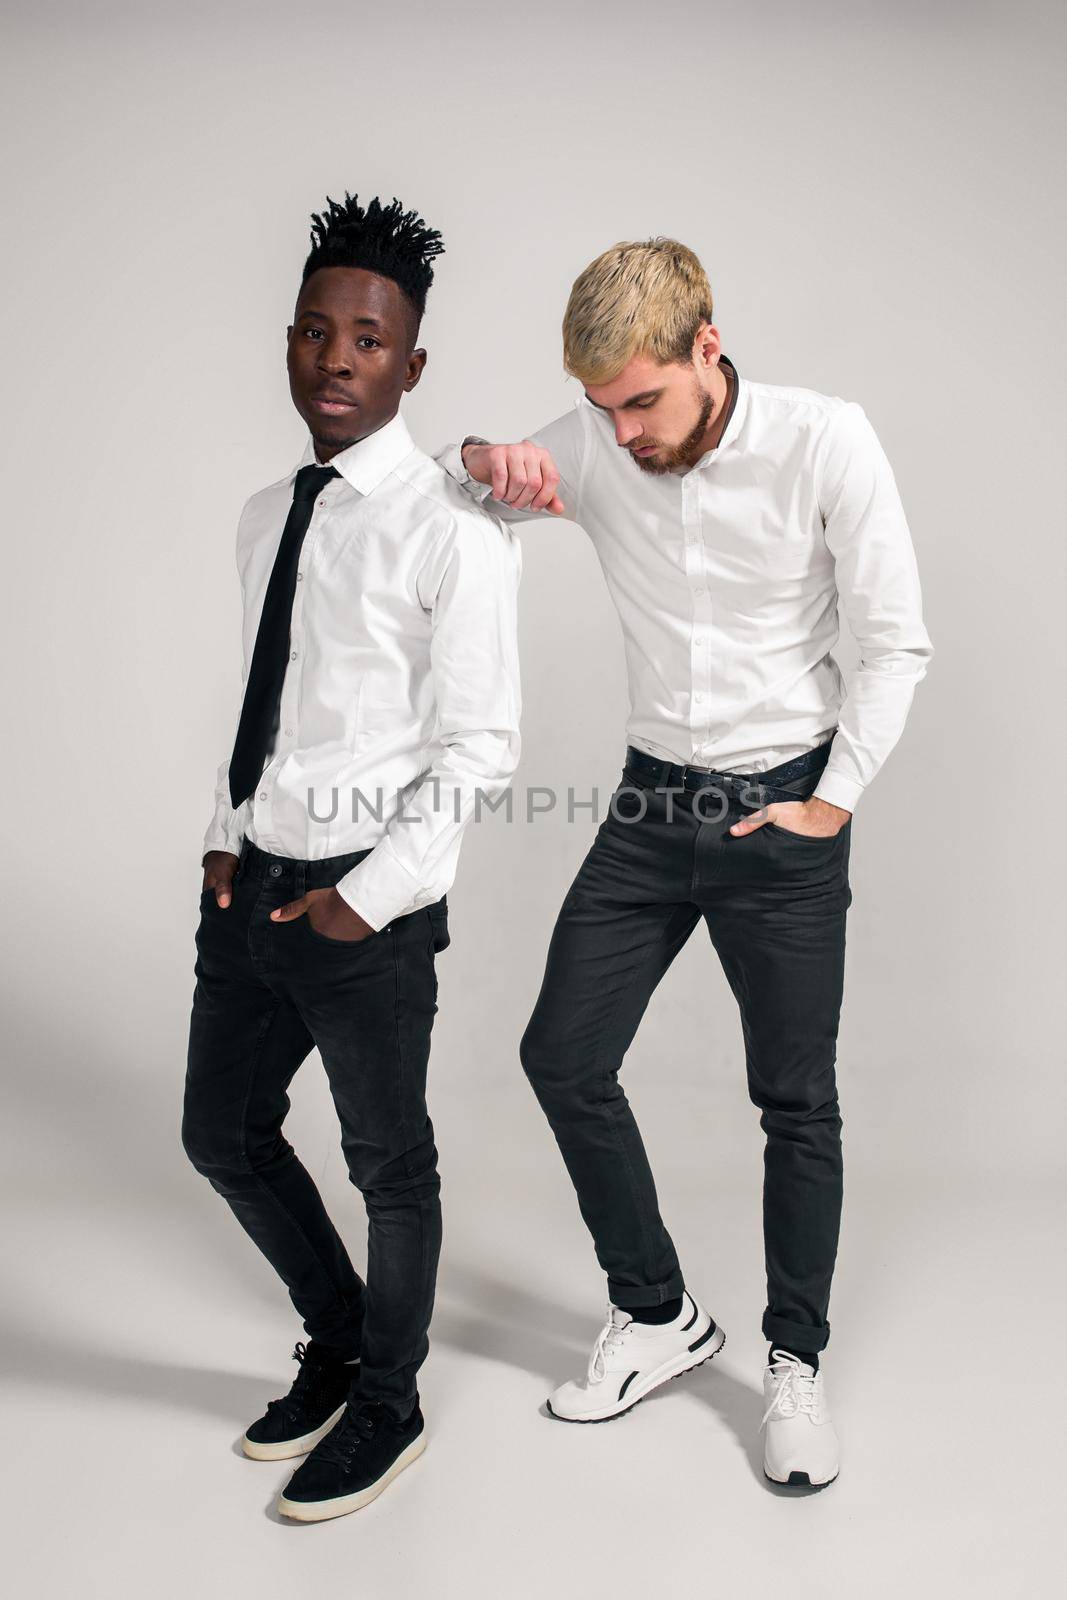 Friends. Two guys in white shirts and dark pants posing in the studio on a white background. Copy space. Full-length photo